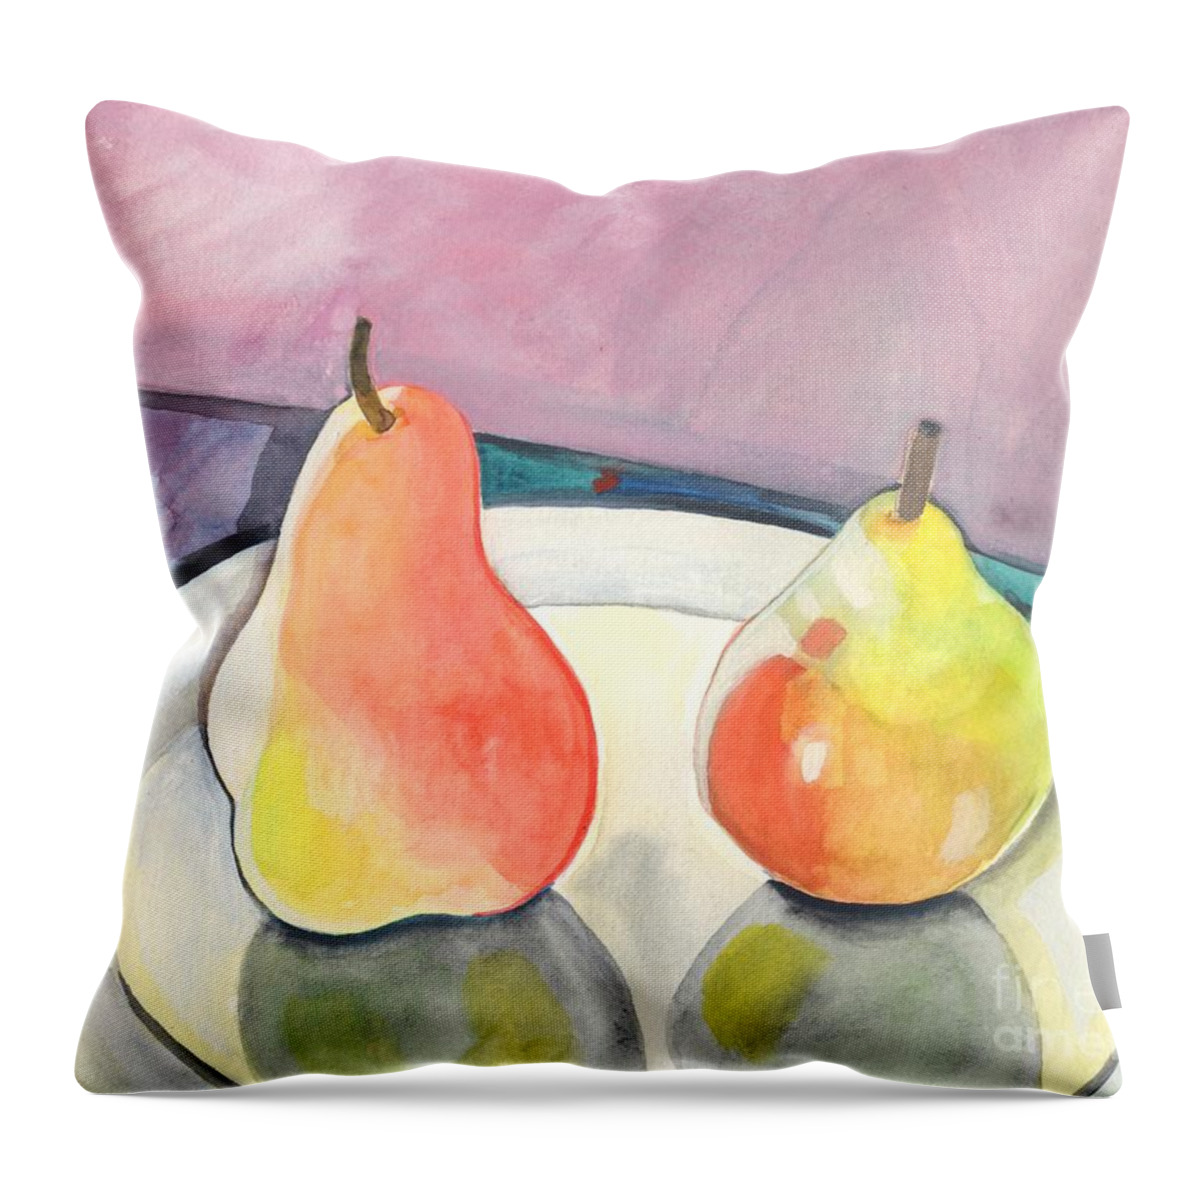 Pear Throw Pillow featuring the painting Two Pears by Helena Tiainen